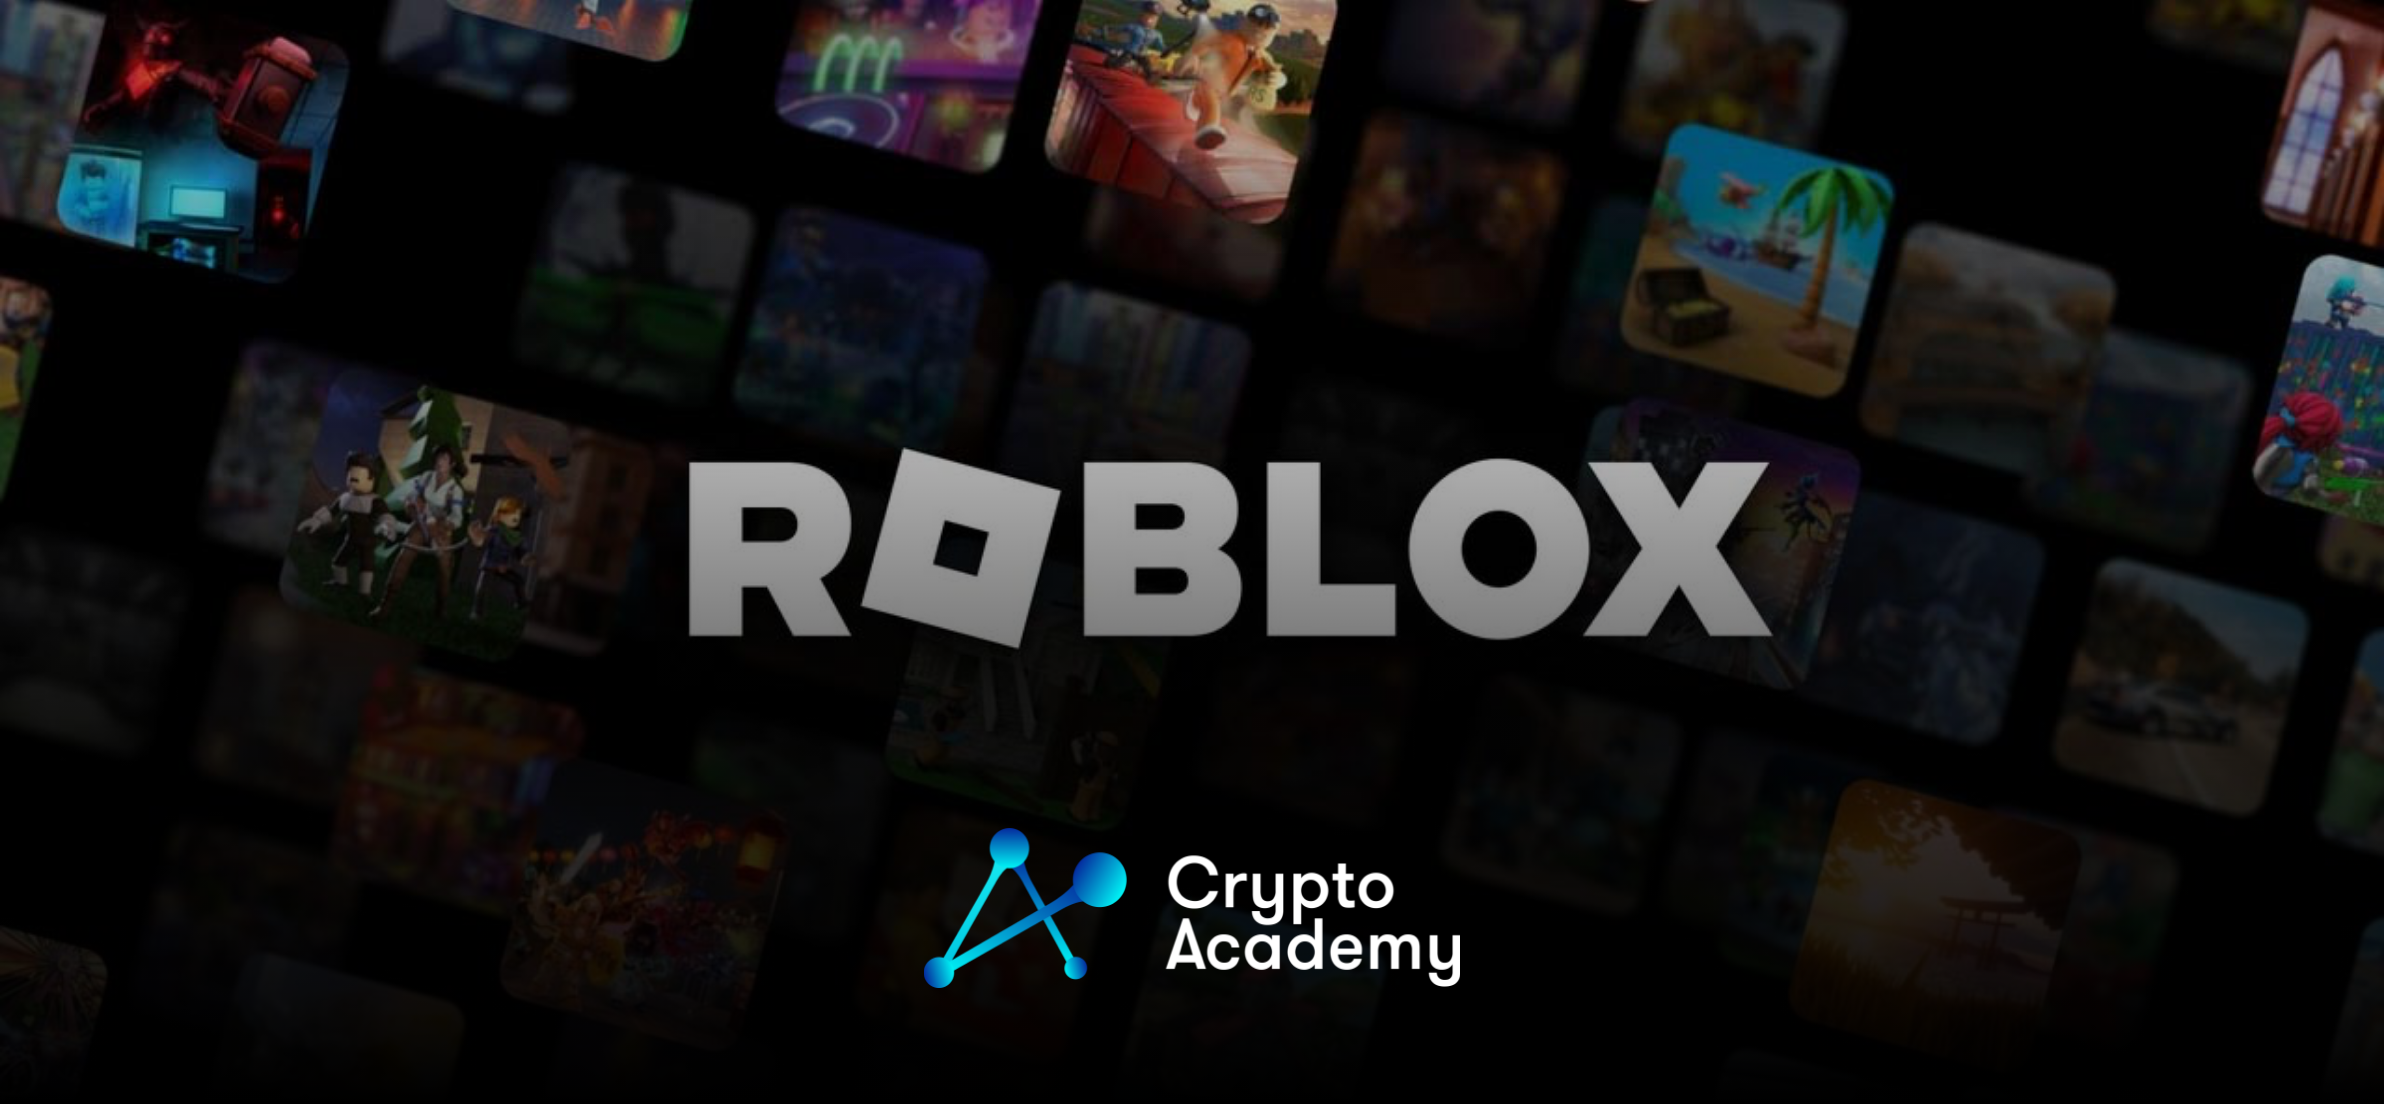 Roblox Refutes XRP Payment Rumors